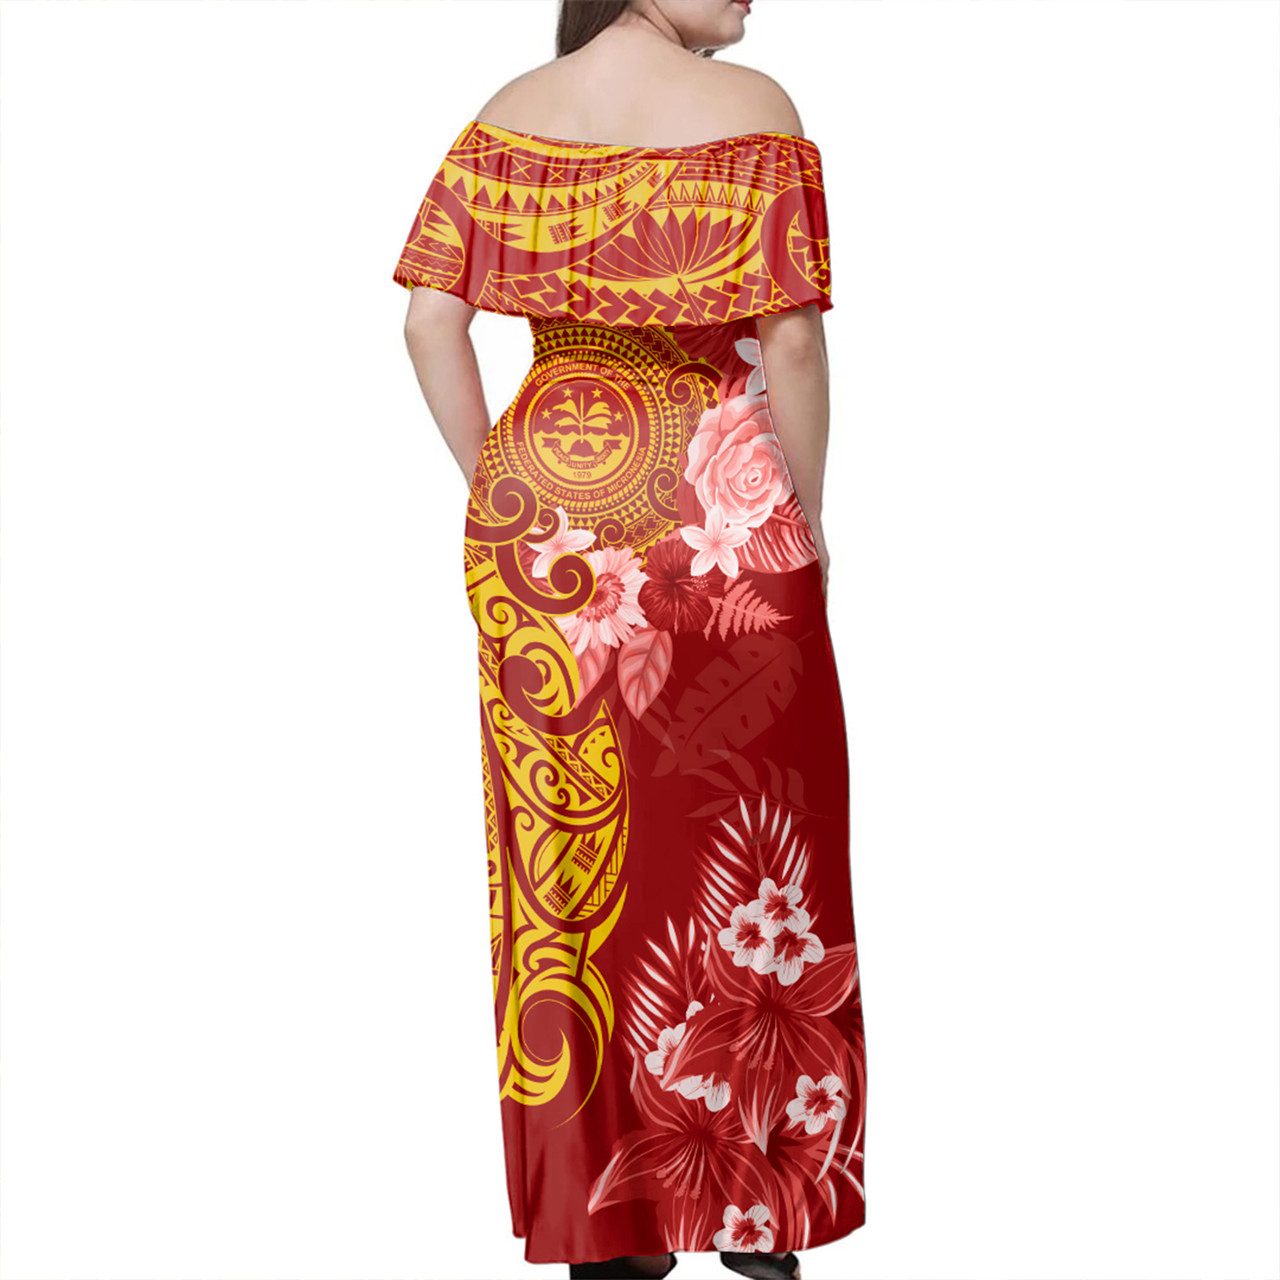 Federated States Of Micronesia Off Shoulder Long Dress Polynesian Tropical Plumeria Tribal Red